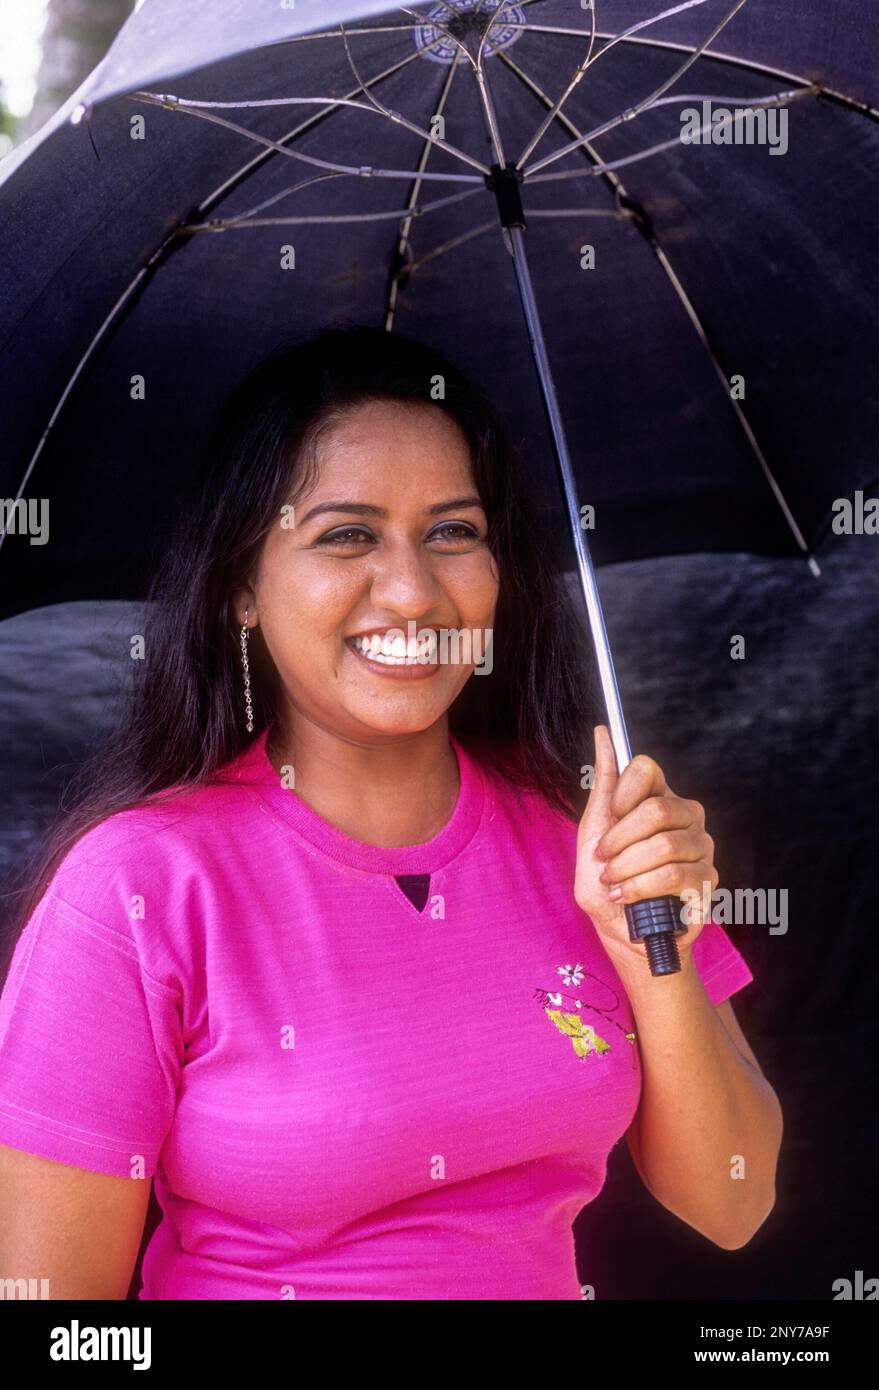 30 Years Old Women With Smiling Hyderabad Andhra Pradesh South India